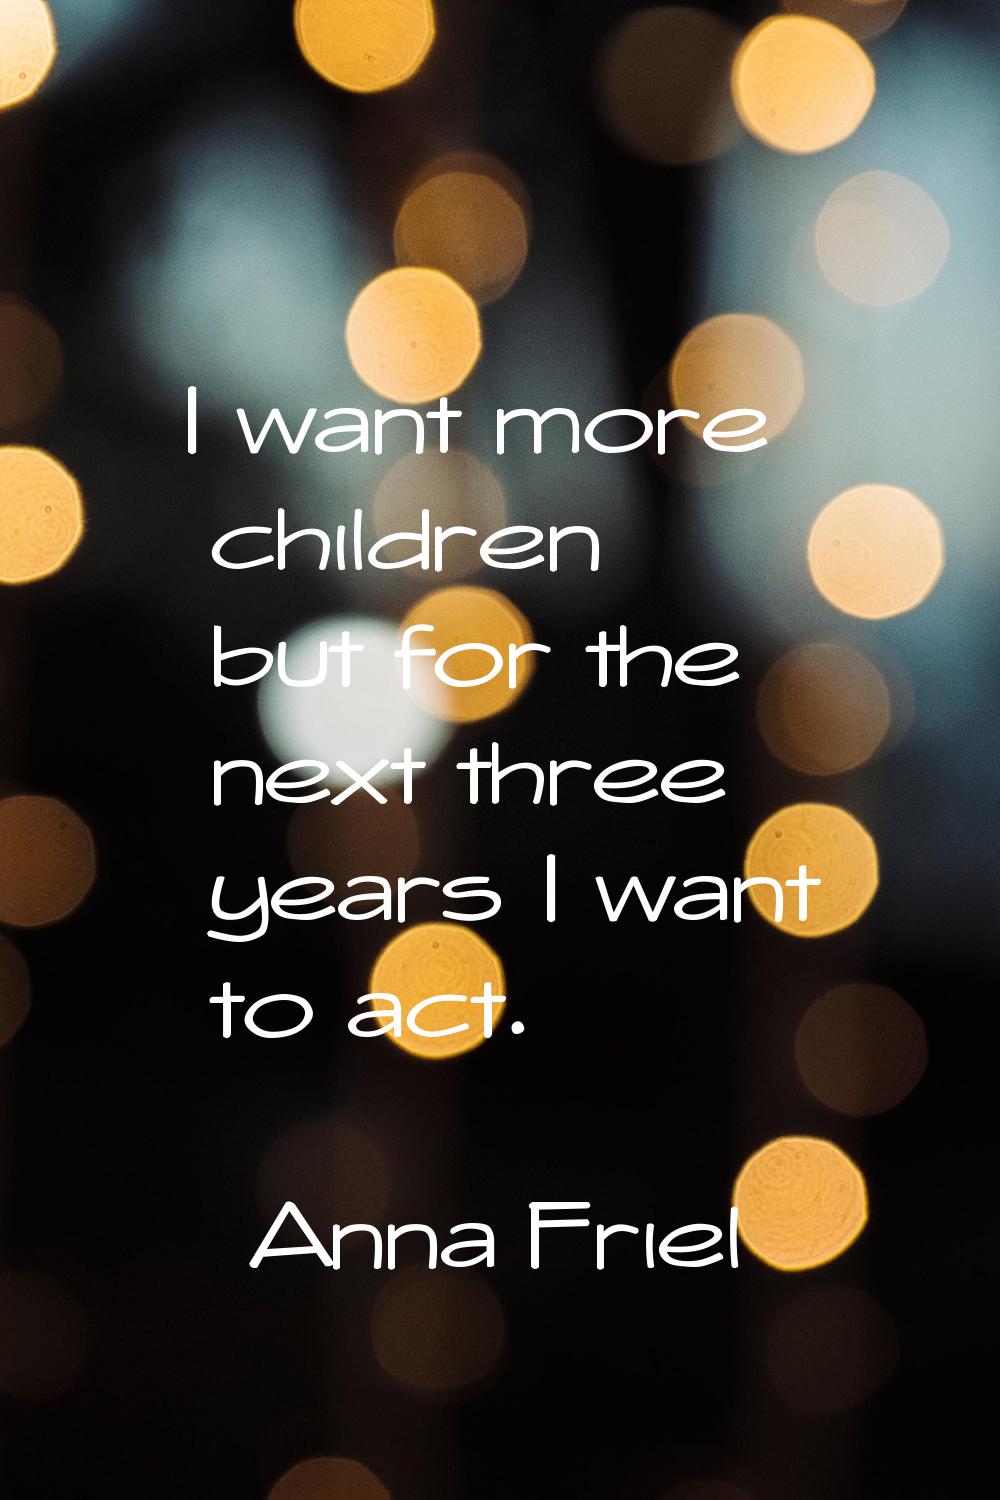 I want more children but for the next three years I want to act.